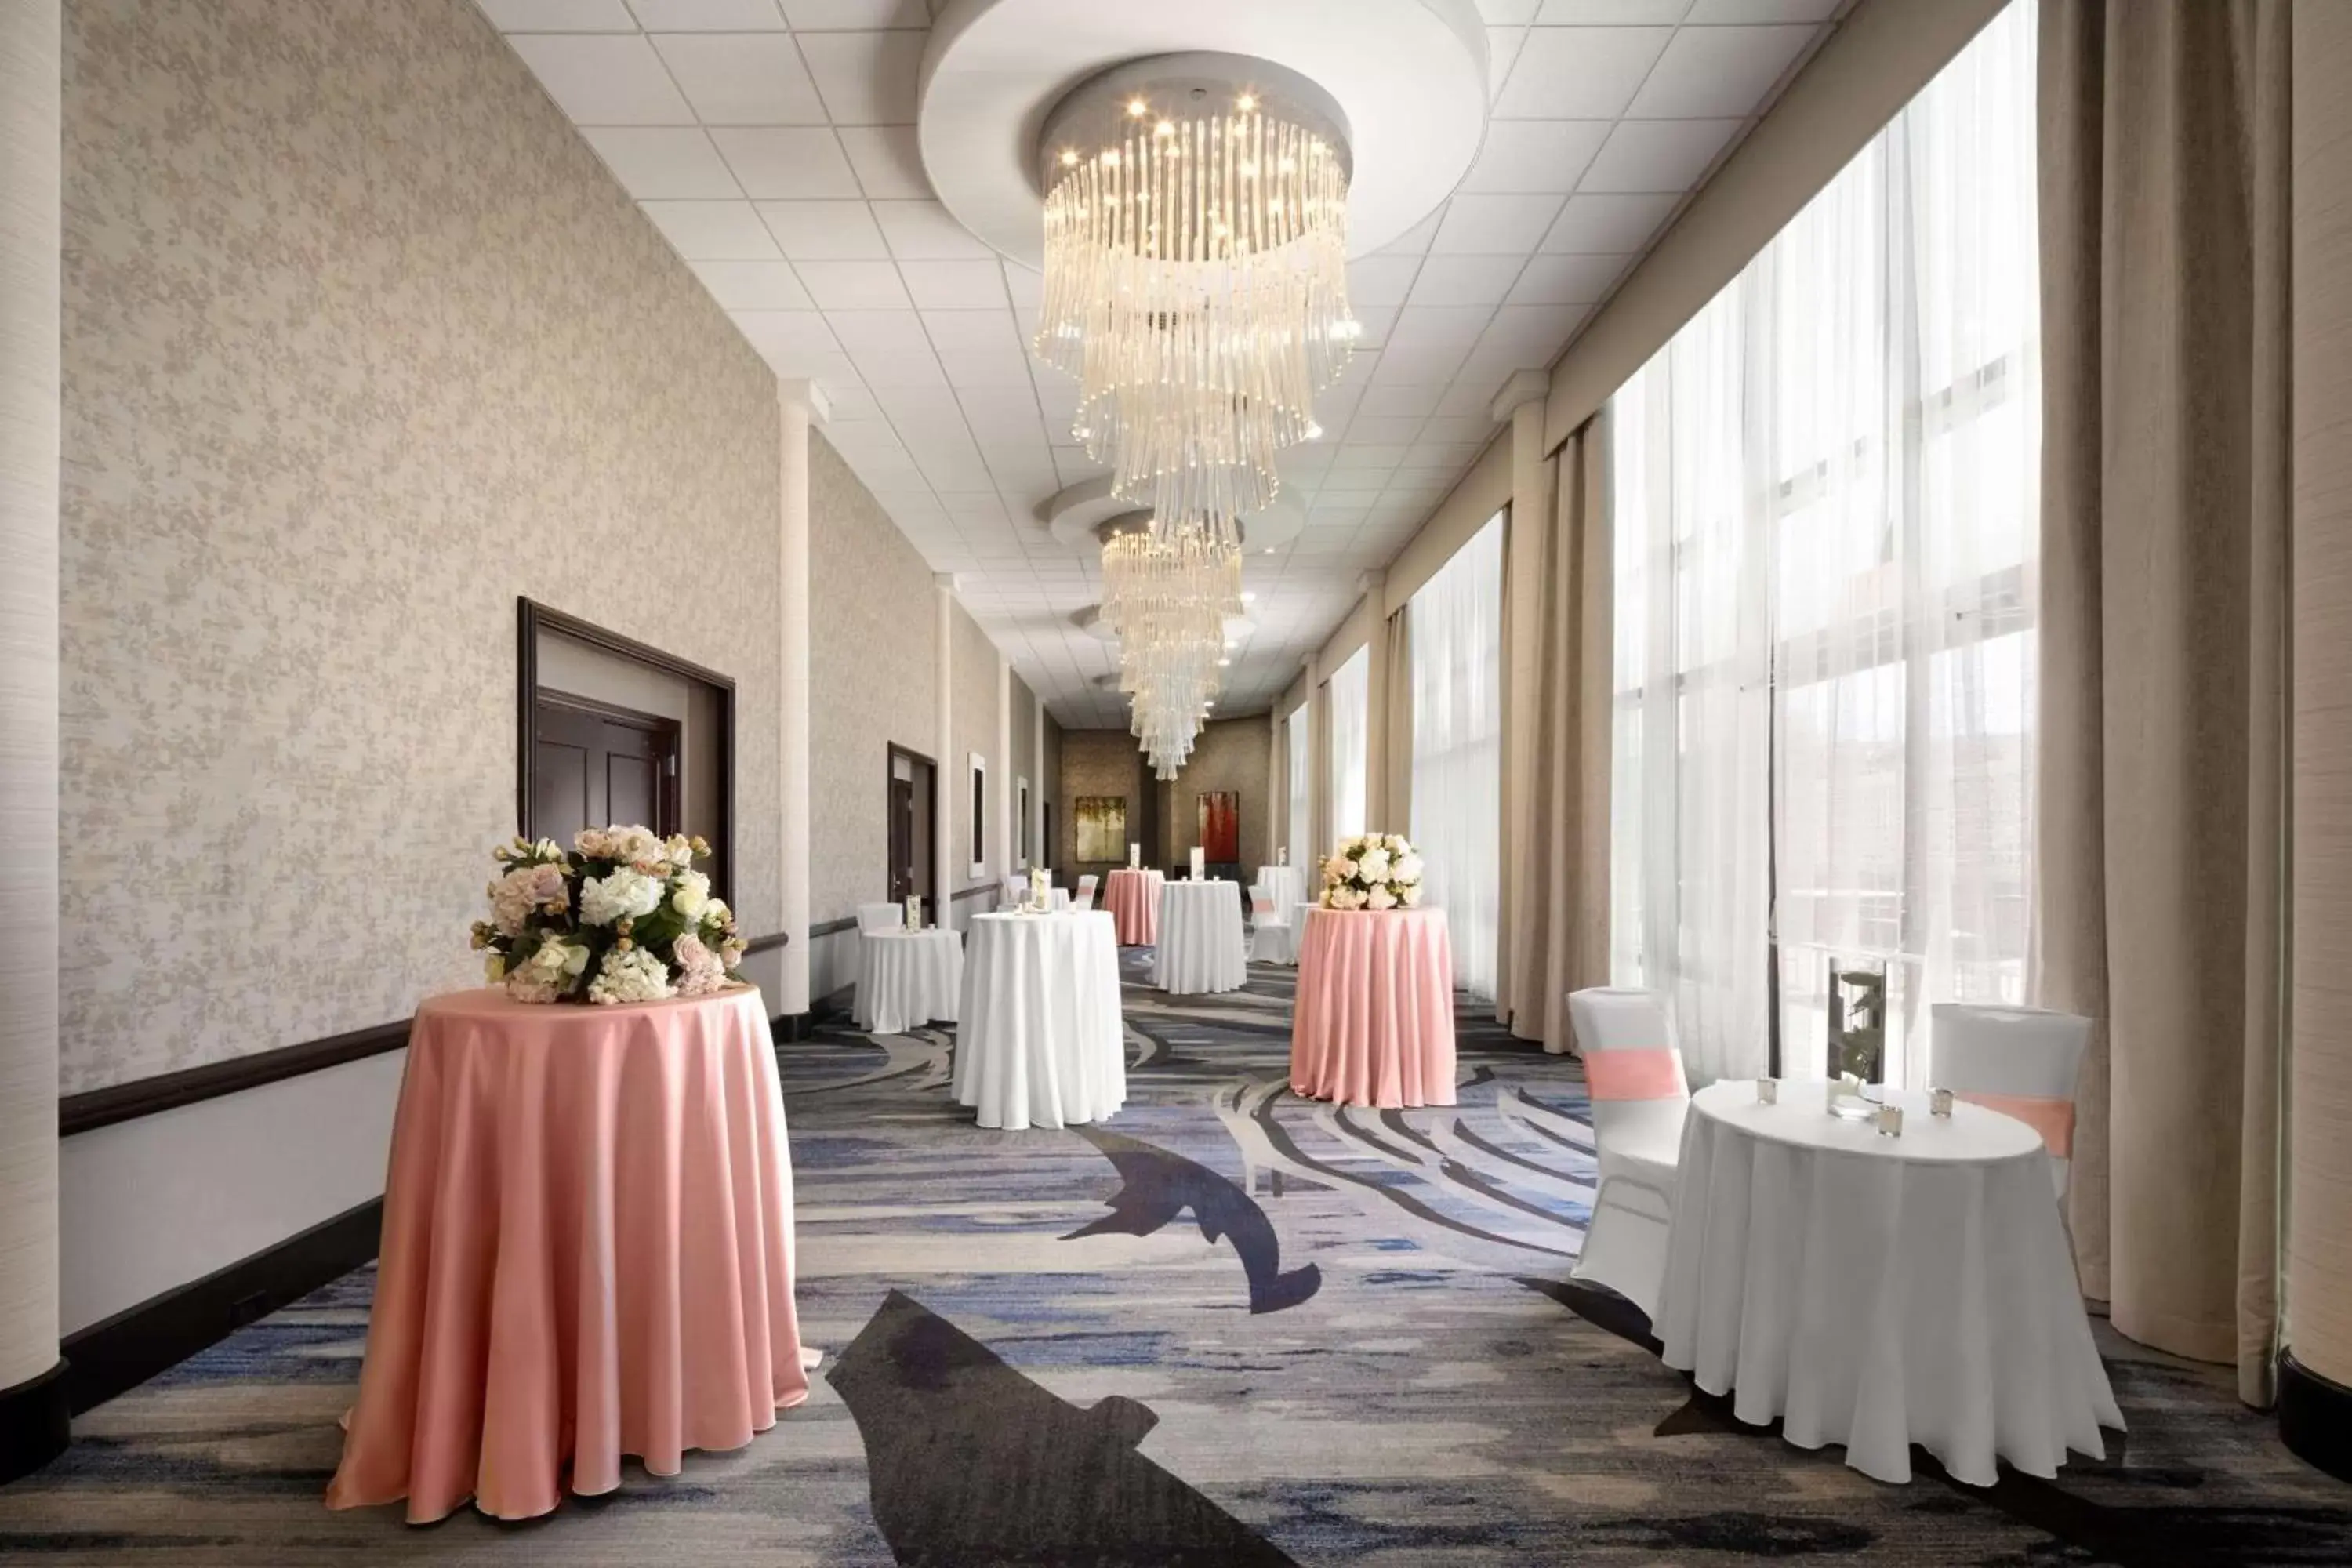 Meeting/conference room, Banquet Facilities in Hilton Long Island/Huntington